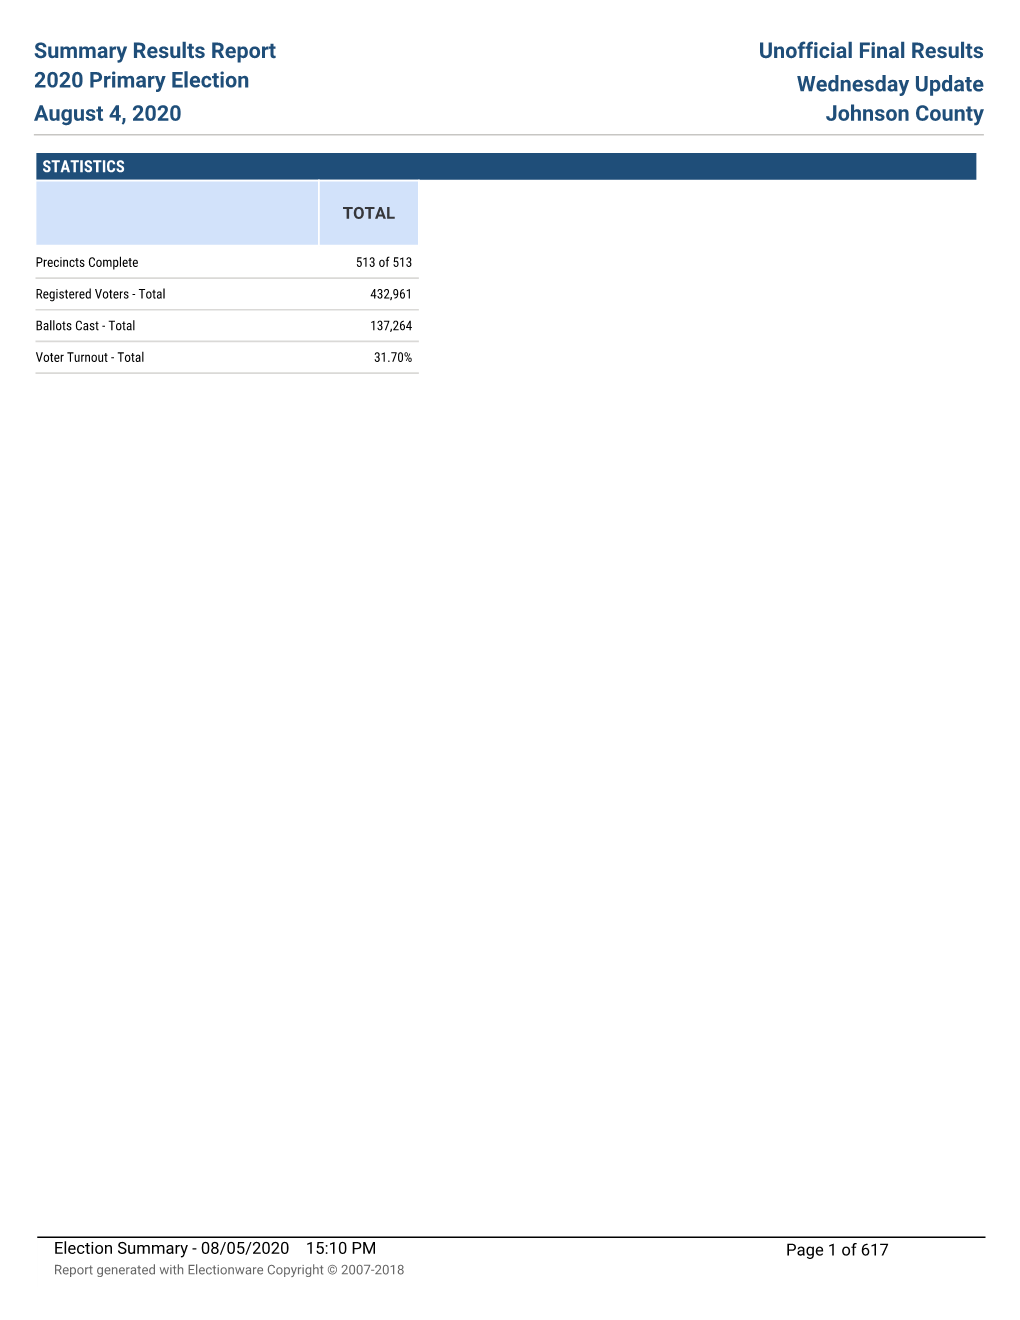 2020 Primary Election Unofficial Final Results